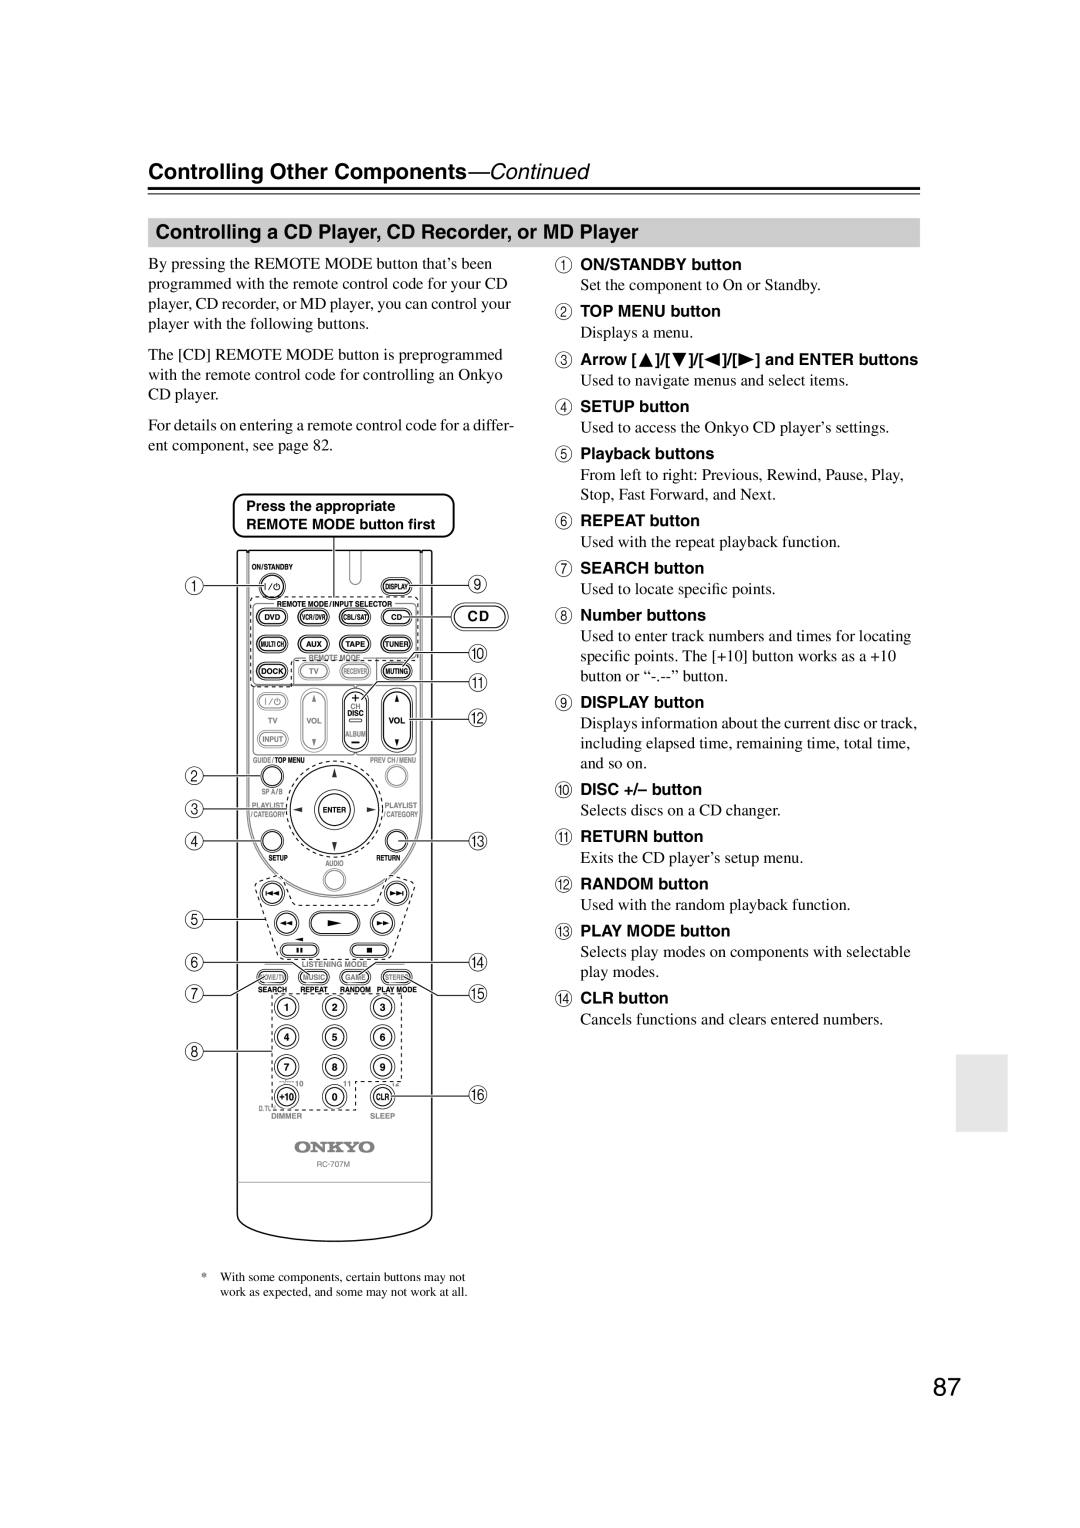 Onkyo HT-S5100 instruction manual Controlling Other Components—Continued, J K L 